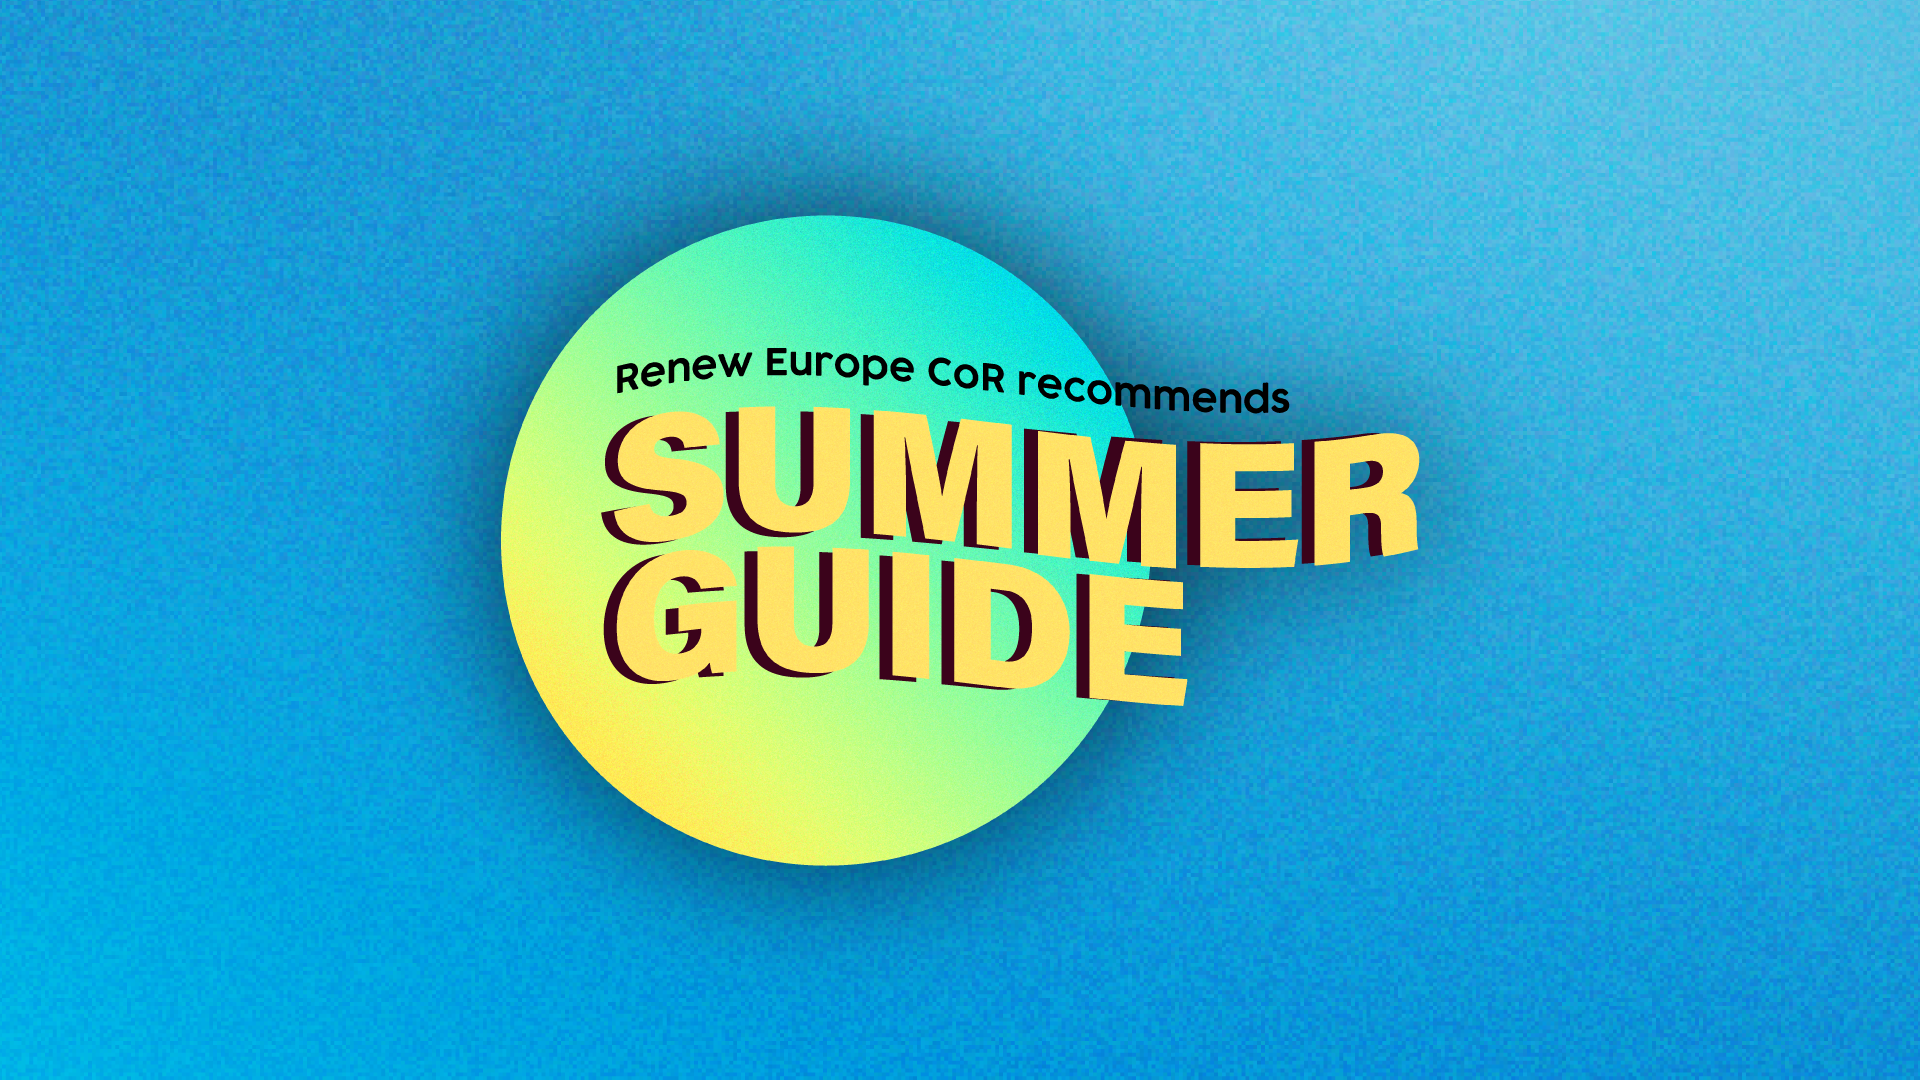 Renew Europe CoR Recommends: A Summer Guide